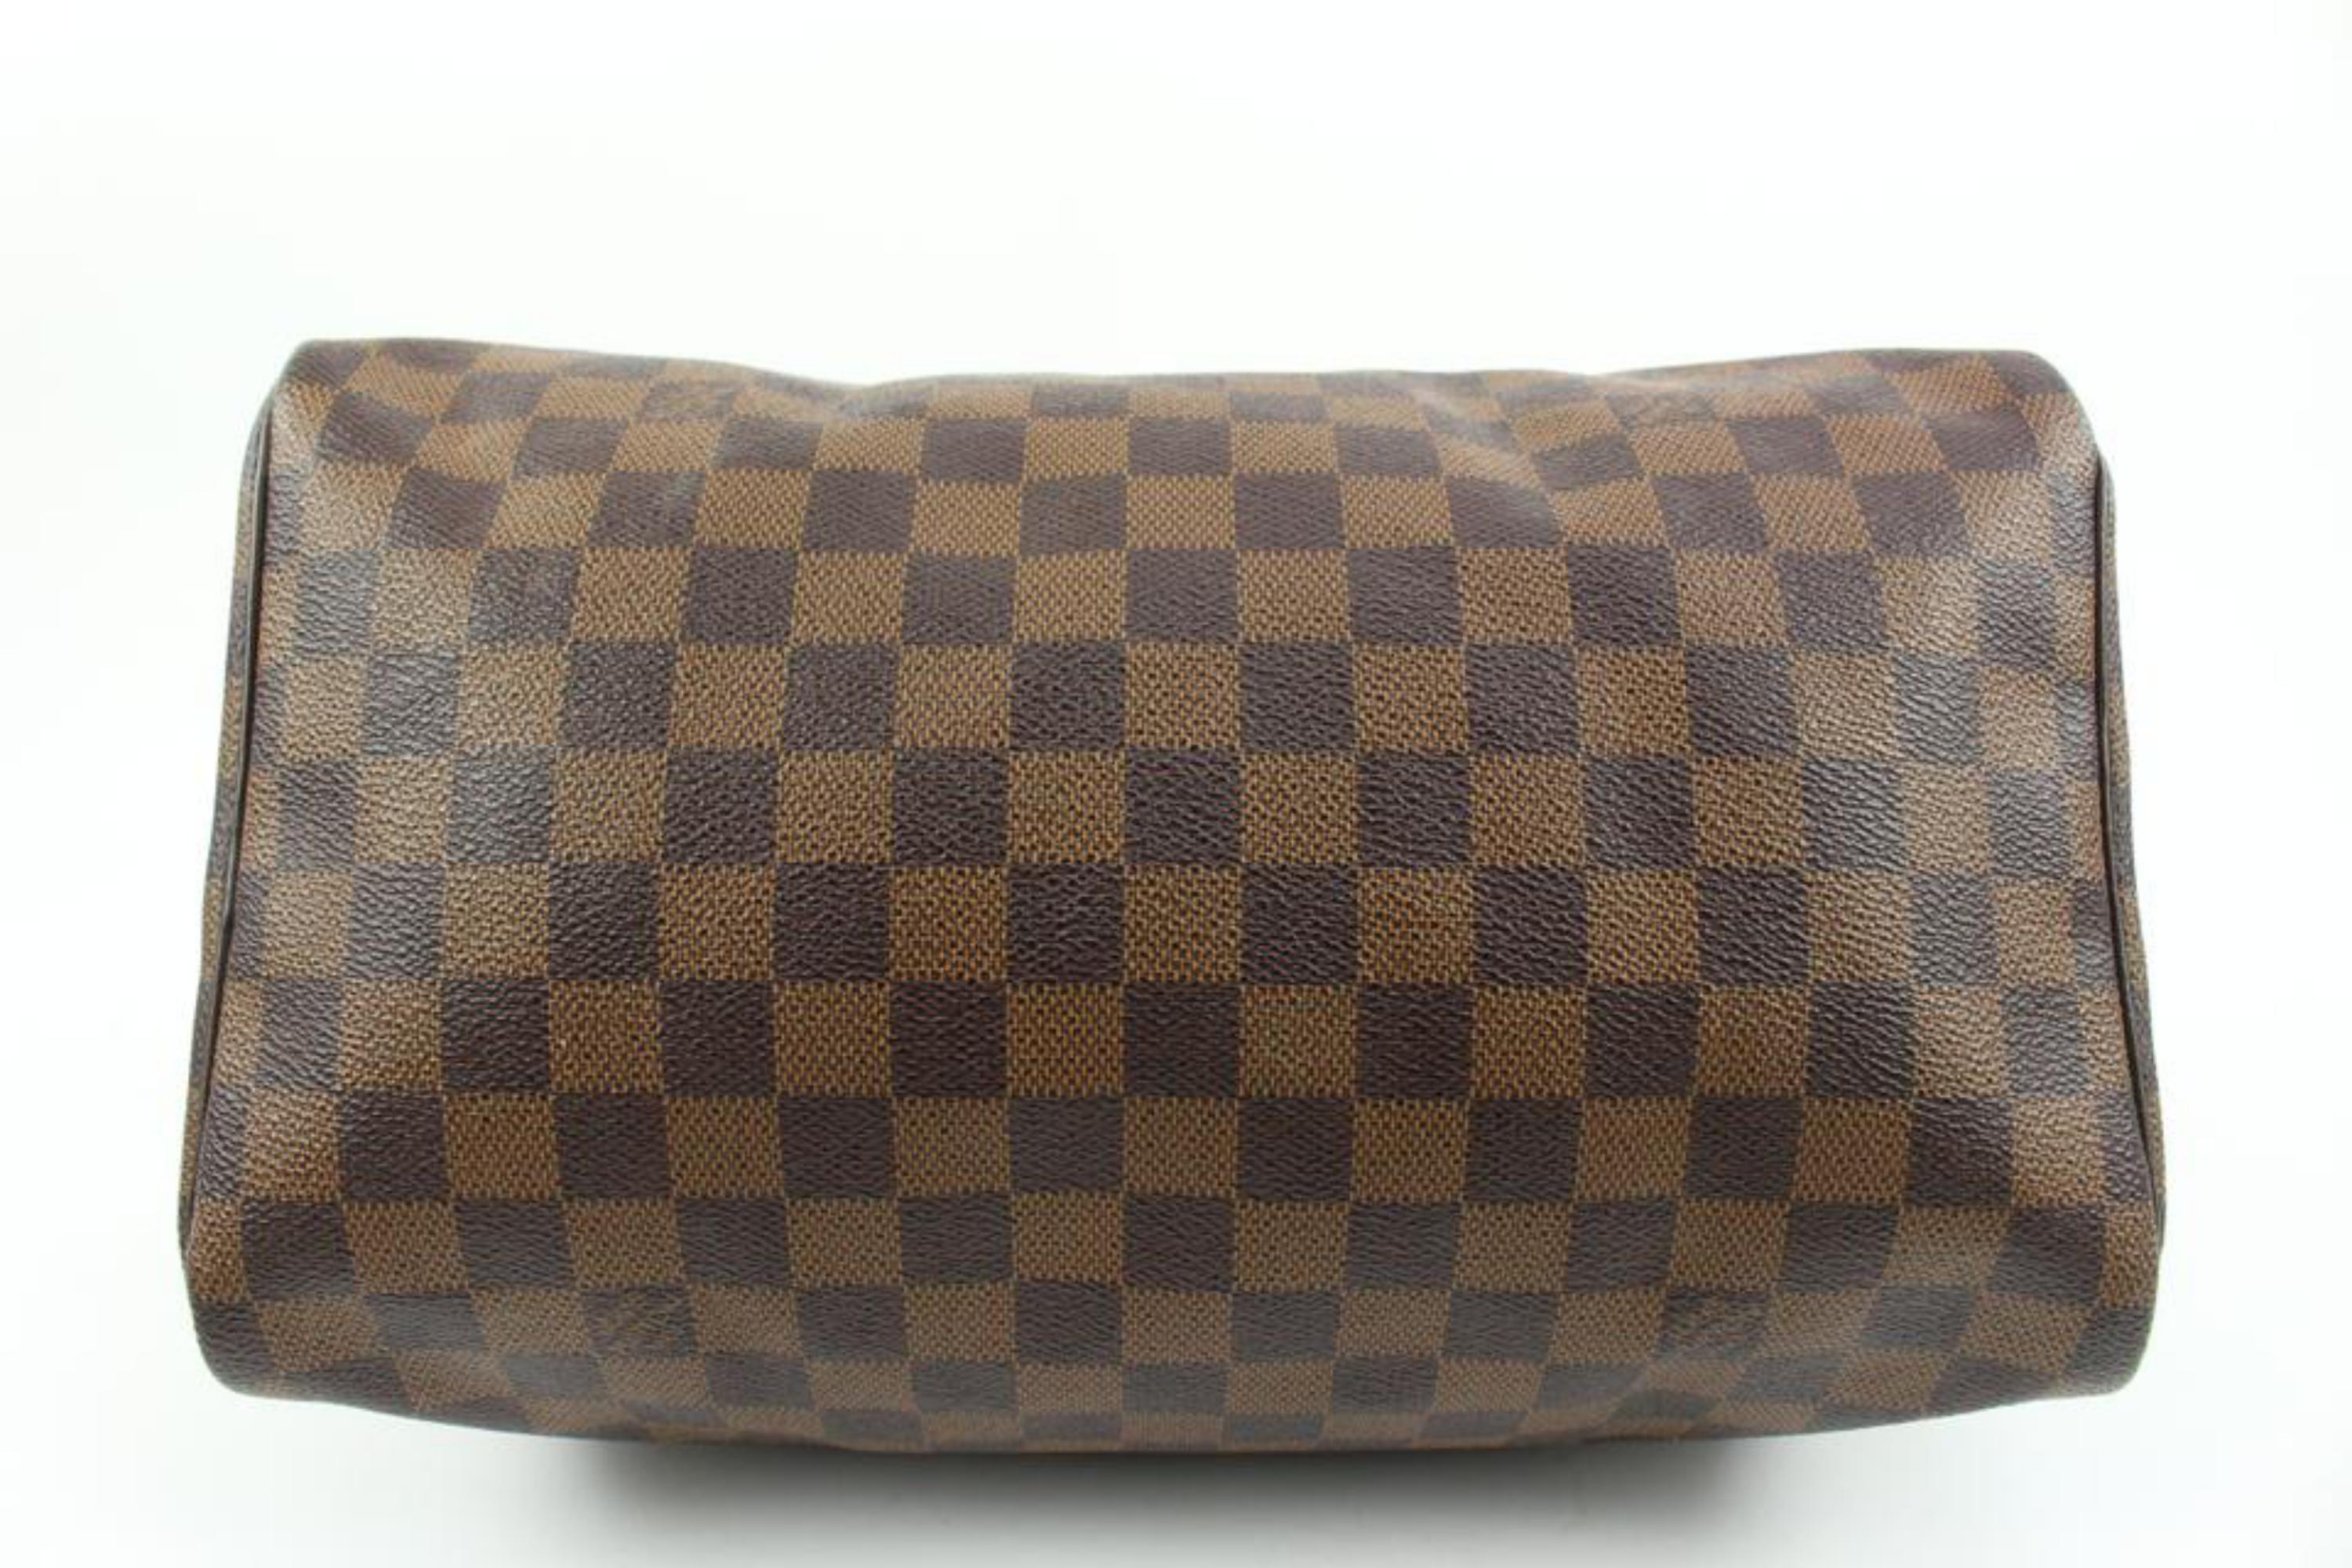 Louis Vuitton Damier Ebene Speedy 30 Boston Bag MM 68lv218s In Good Condition For Sale In Dix hills, NY